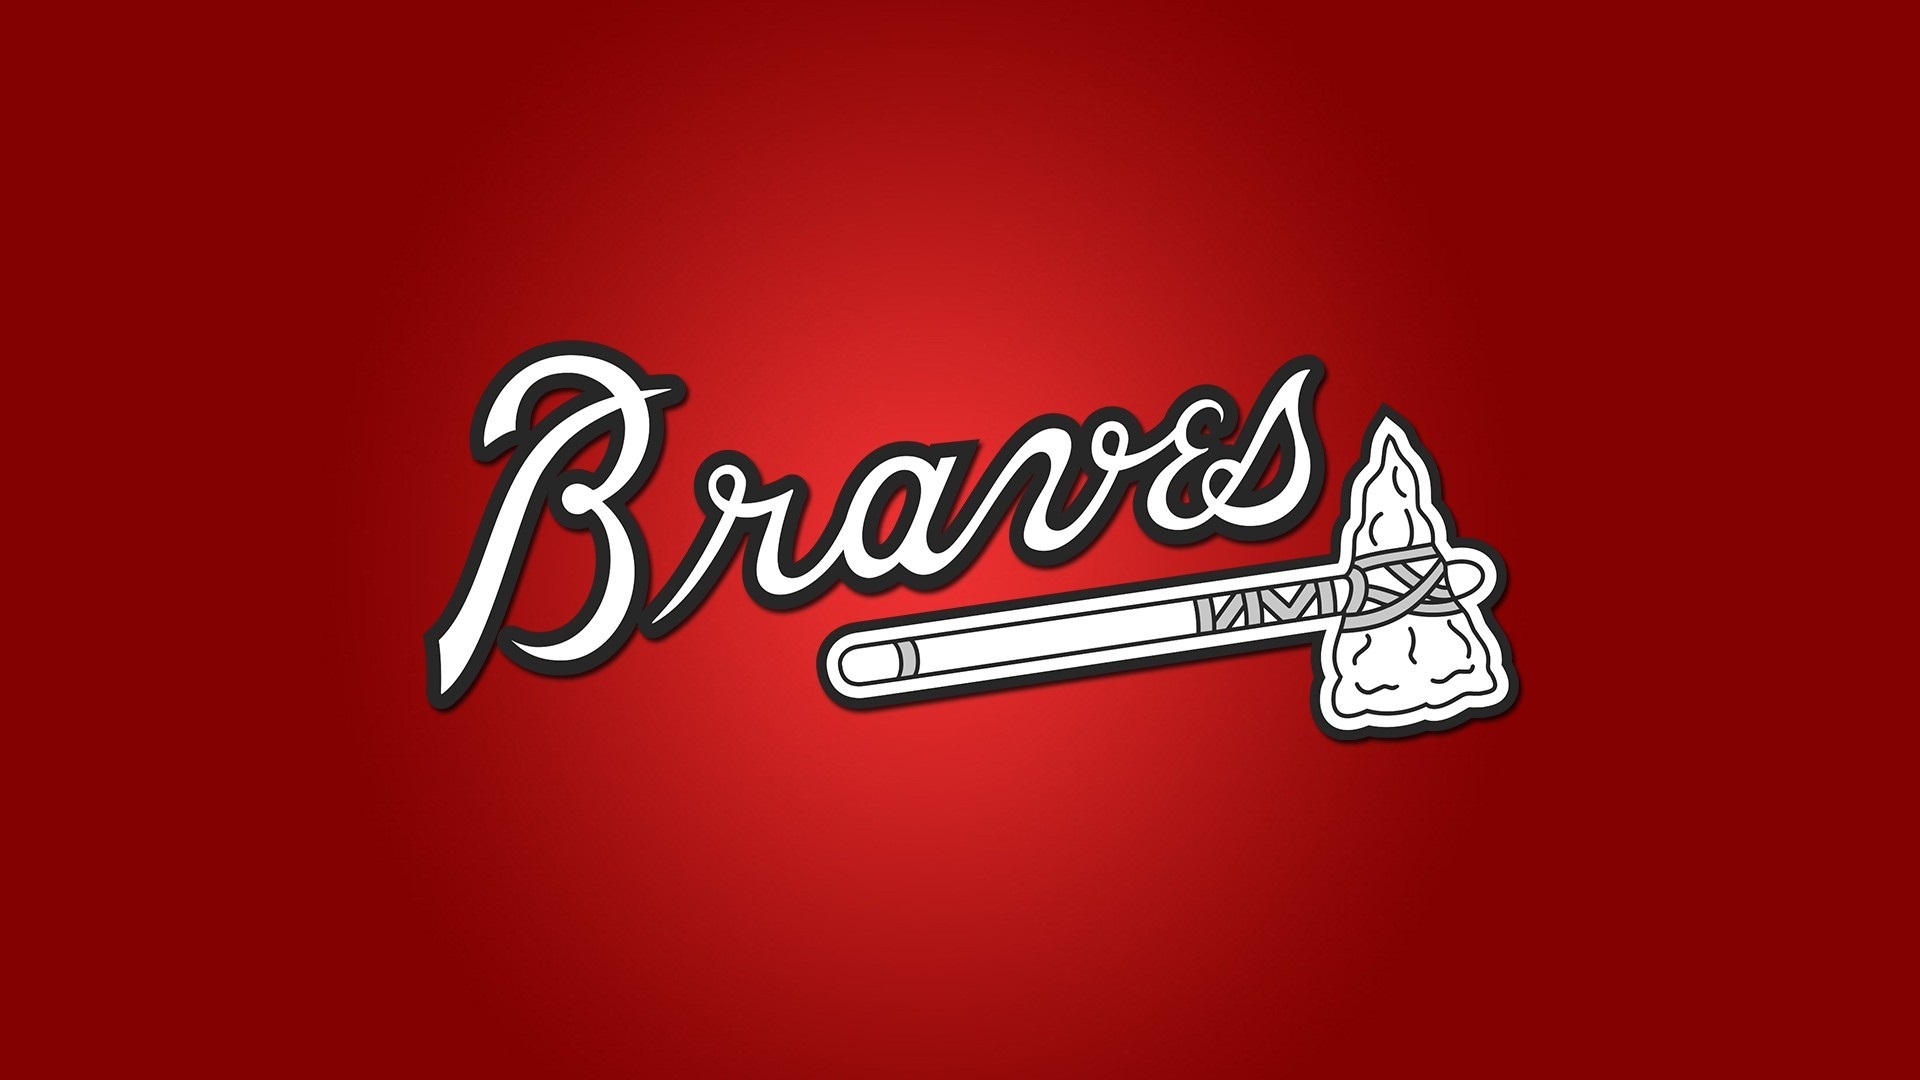 HD Atlanta Braves Wallpapers With high-resolution 1920X1080 pixel. You can use this wallpaper for Mac Desktop Wallpaper, Laptop Screensavers, Android Wallpapers, Tablet or iPhone Home Screen and another mobile phone device